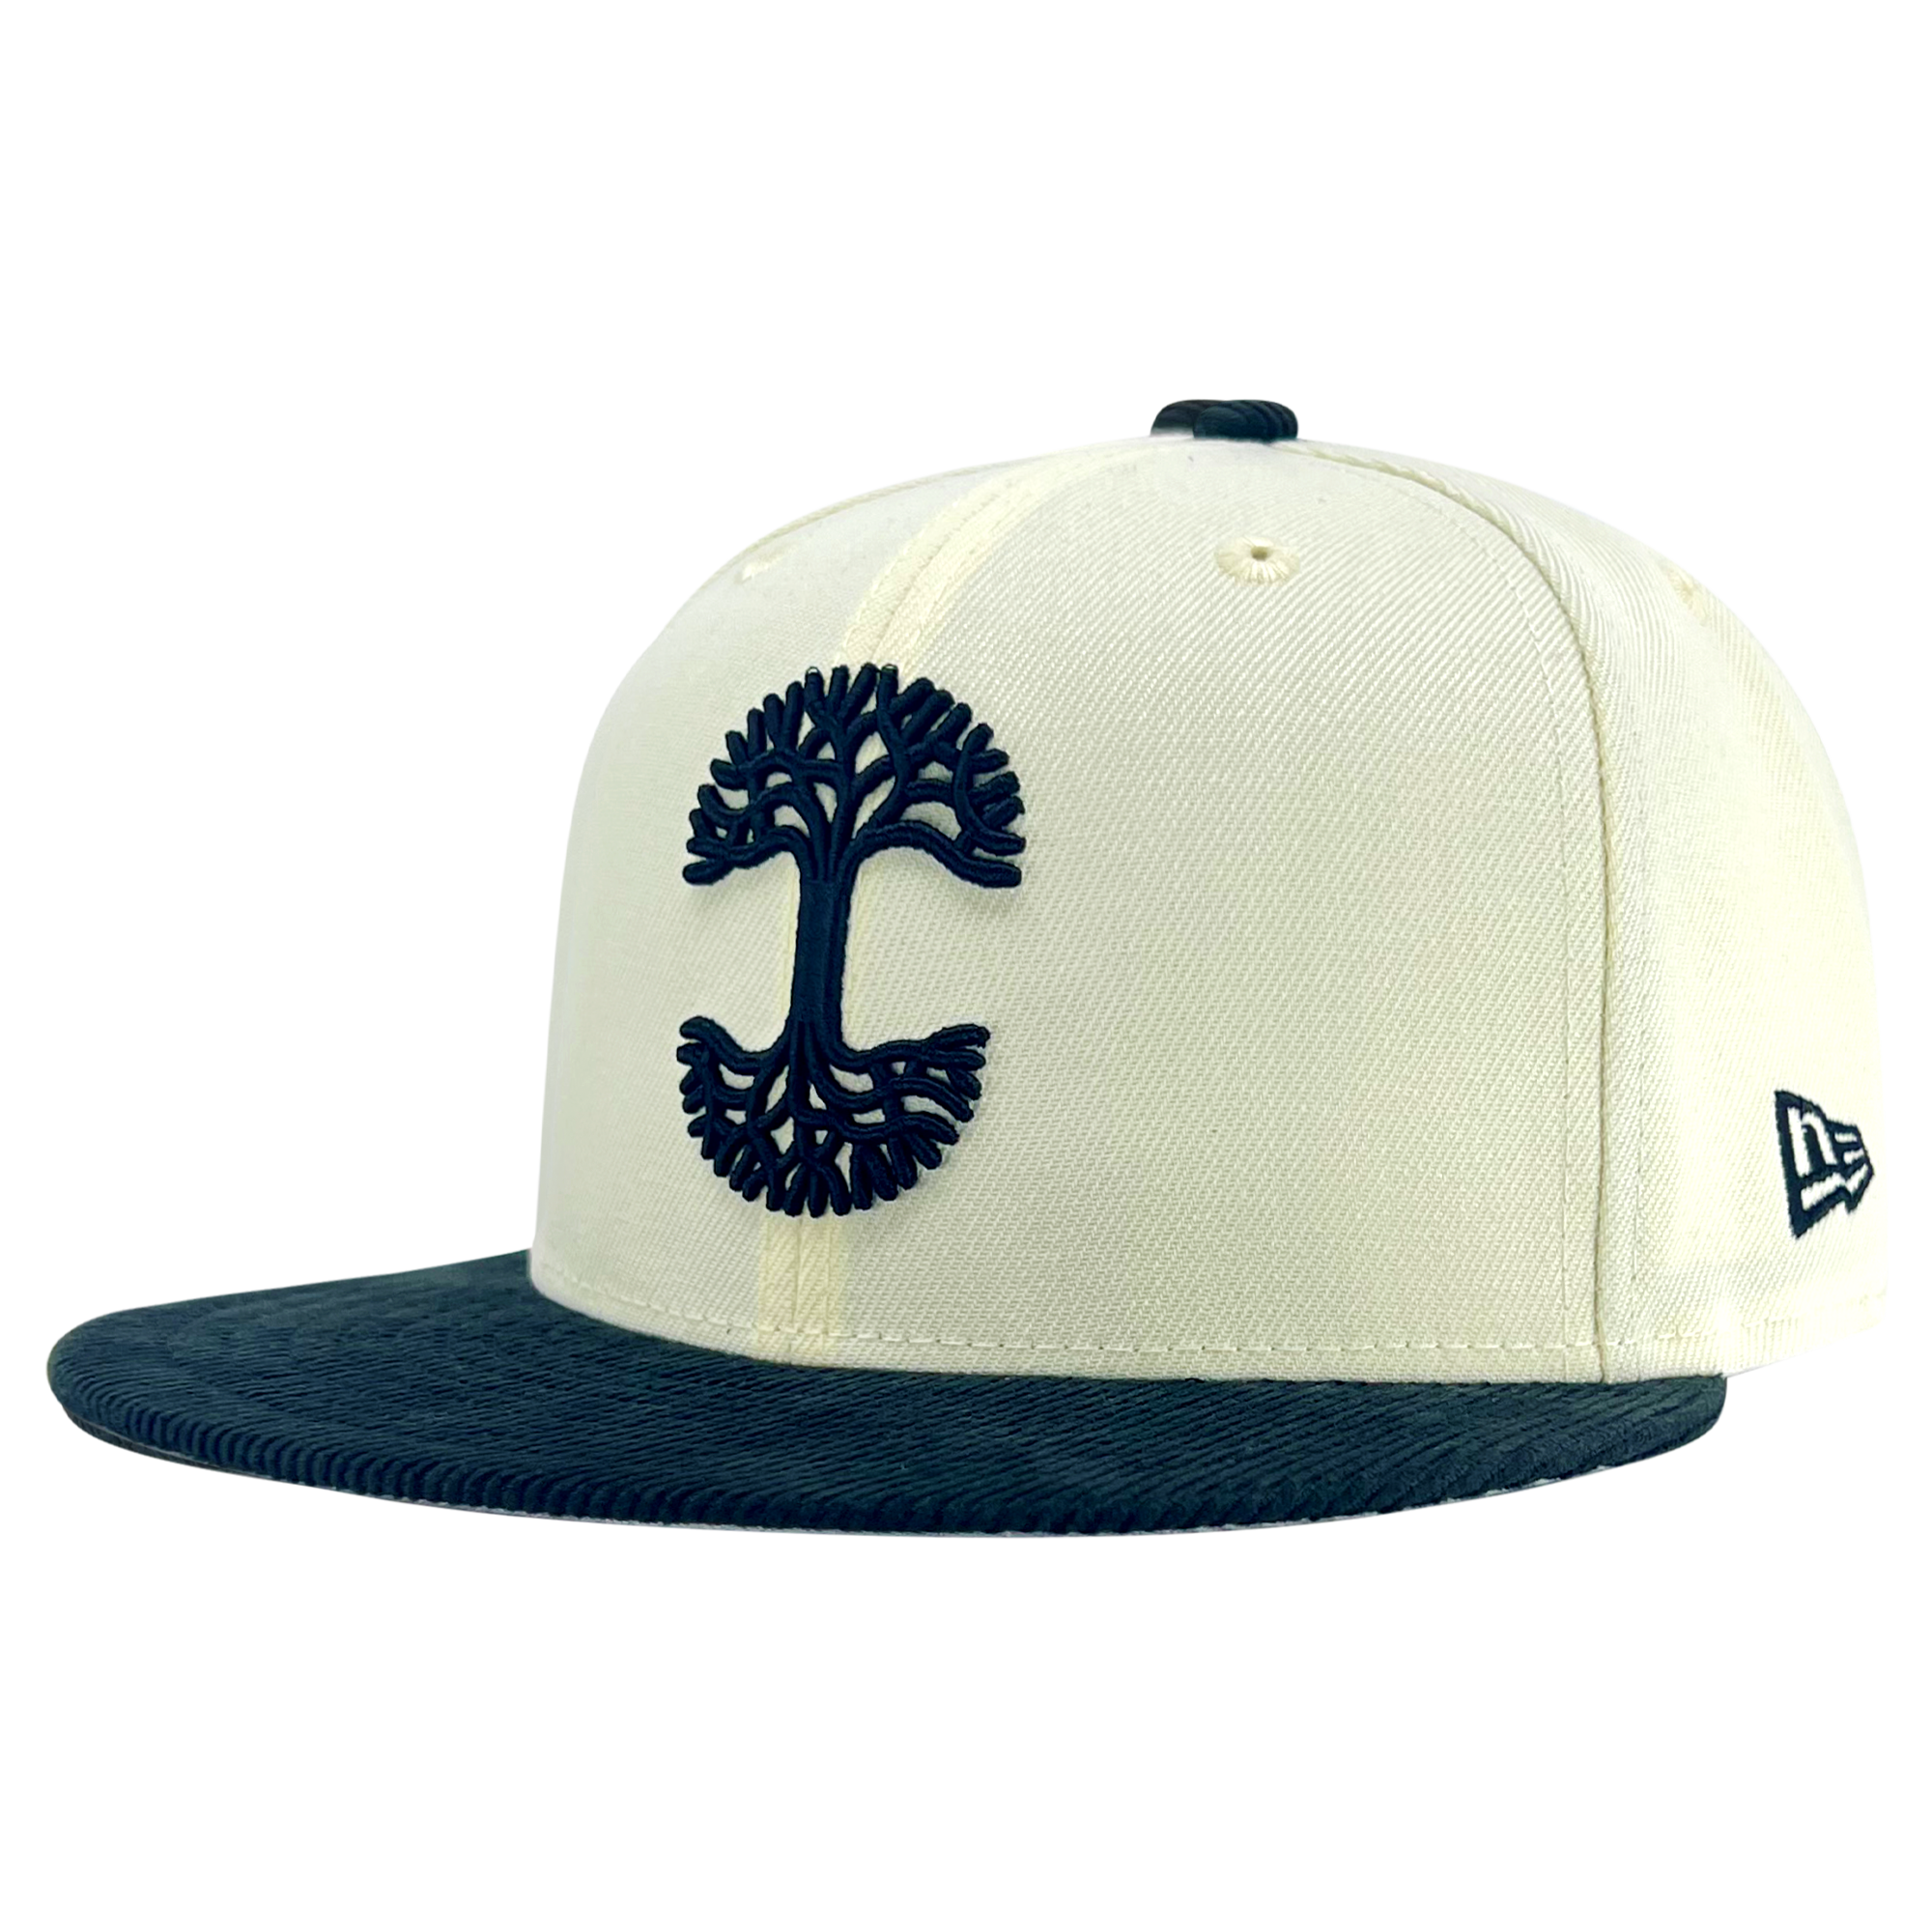 Fitted cap in chrome white, with a black corduroy brim and black embroidered Oaklandish tree logo - angled to show the New Era logo on left wear side.